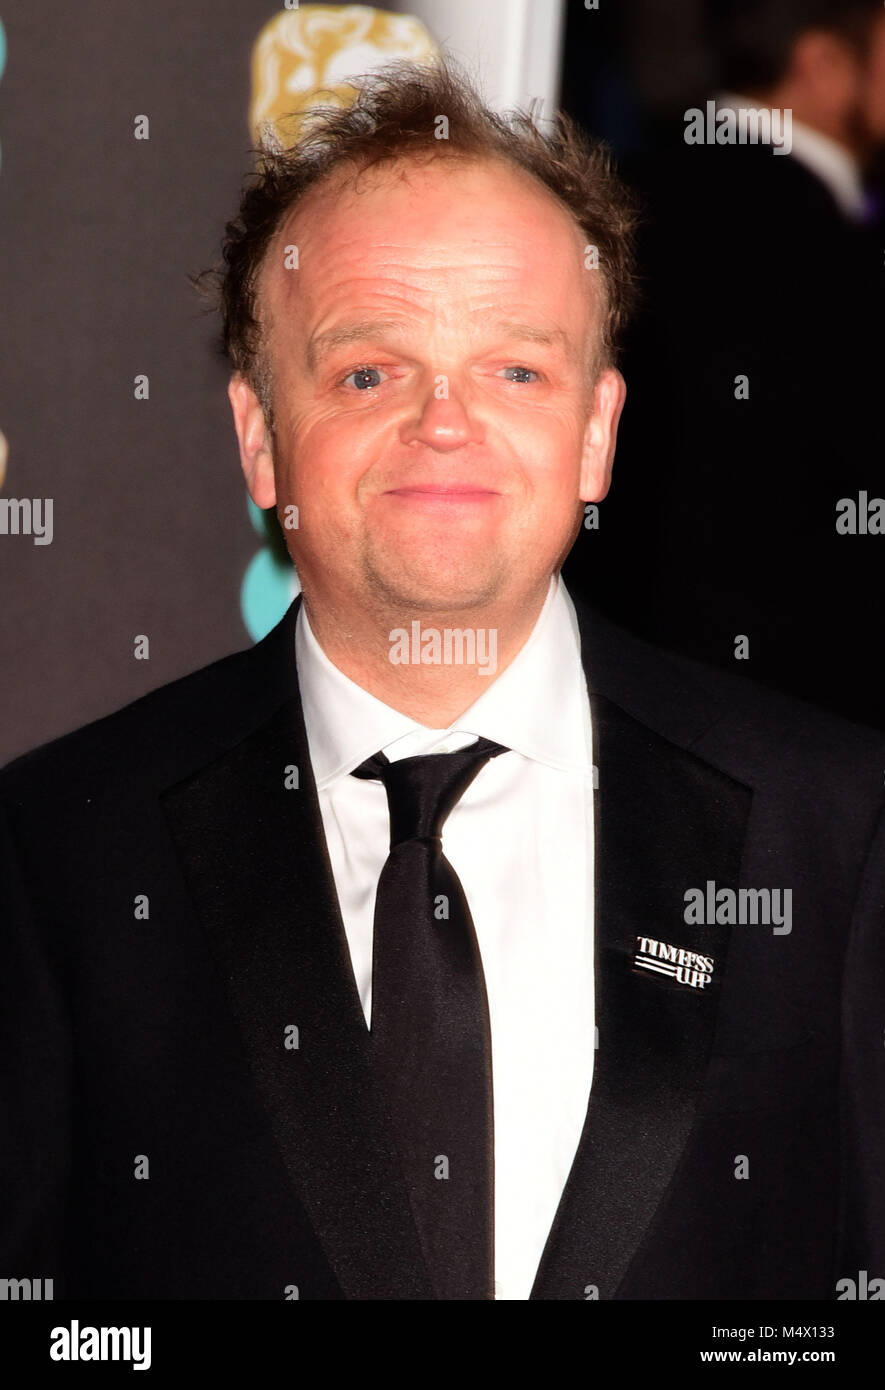 London, UK. 18th Feb, 2018. Toby Jones attending The EE British Academy Film Awards, at The Royal Albert Hall London Sunday 18th February. Credit: Peter Phillips/Alamy Live News Stock Photo